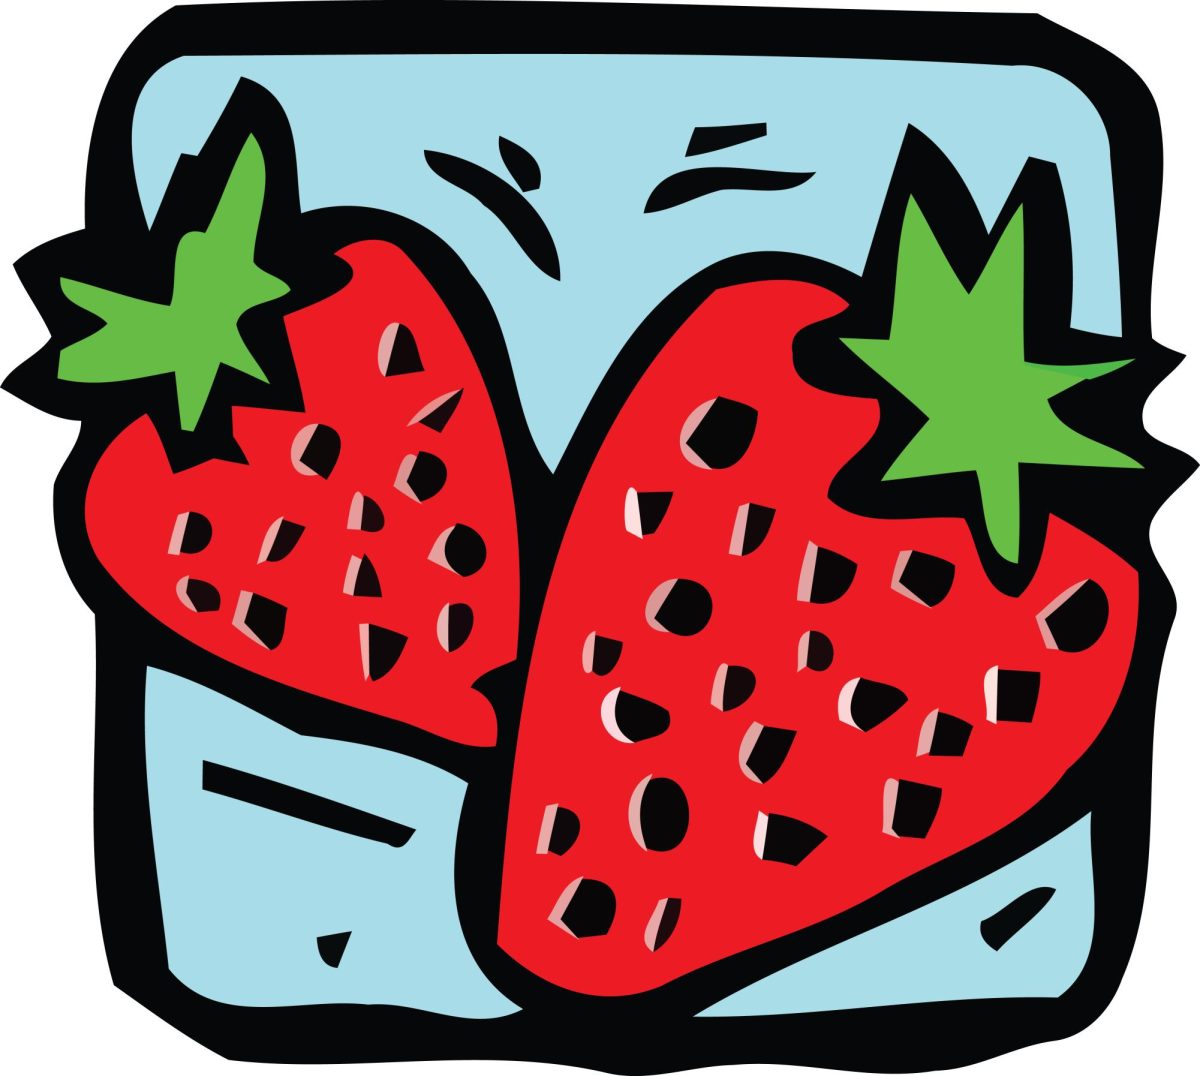 Strawberries+are+often+an+underrated+fruit%2C+despite+its+many+amazing+qualities+%28free.clipartof.com%29